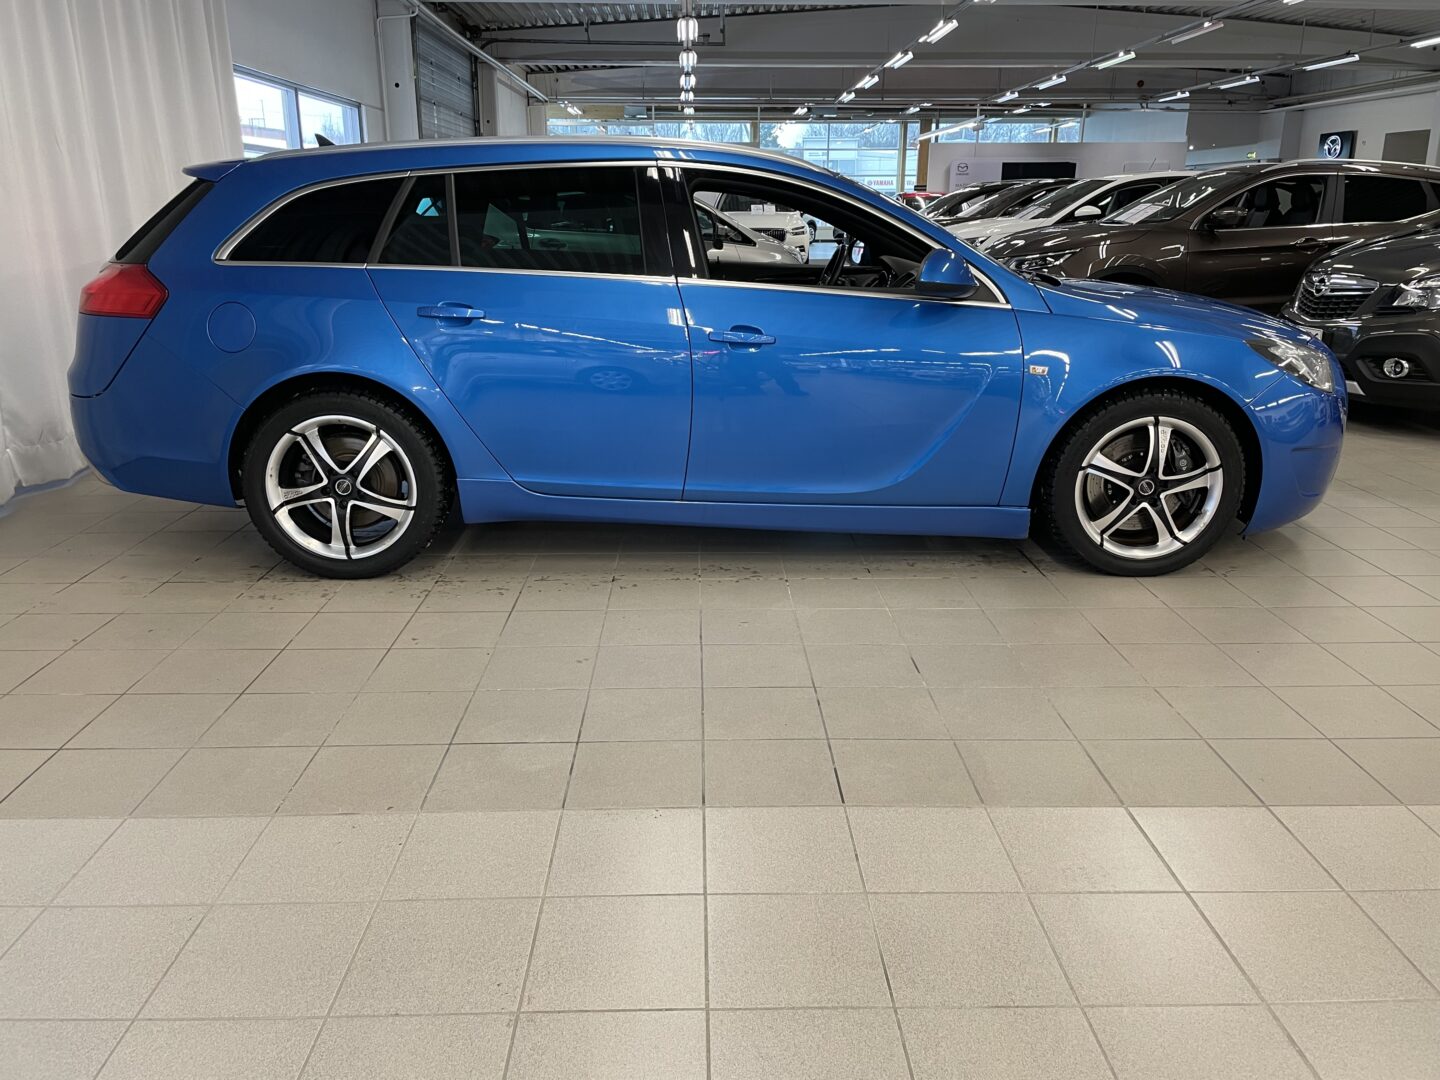 OPEL INSIGNIA Sports Tourer 2,8 Turbo 4x4 325hv AT6 OPC